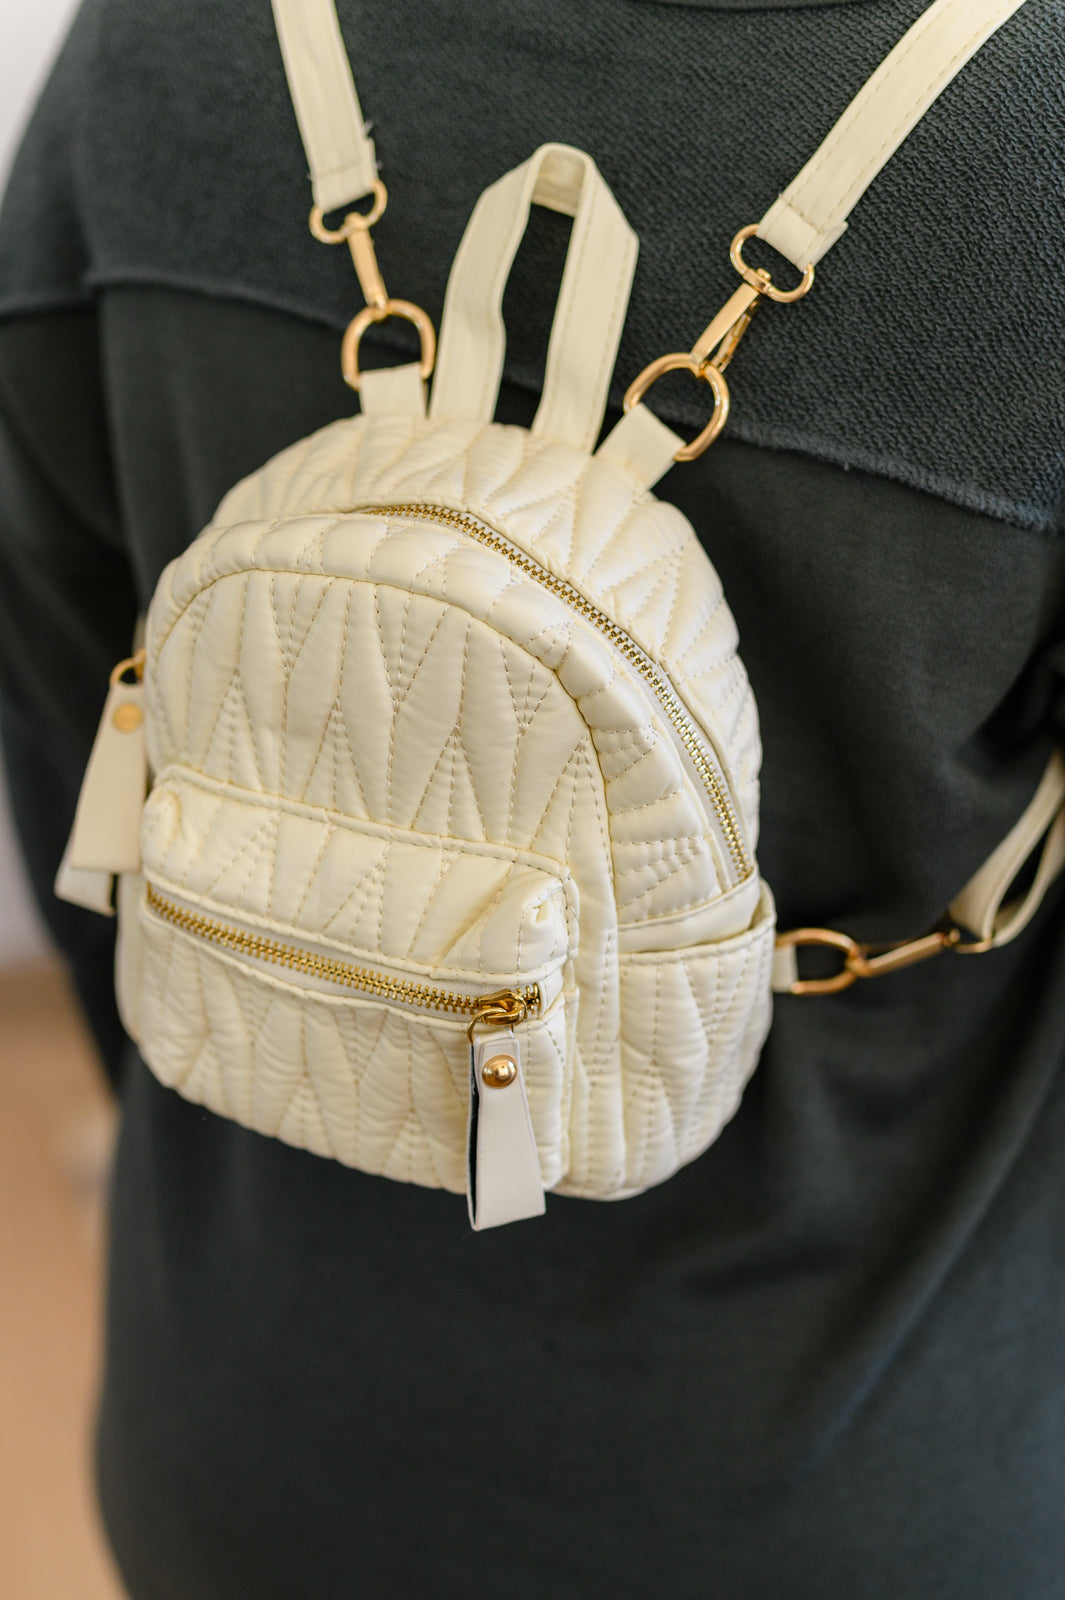 Introducing the Take It With You Quilted Mini Backpack - the perfect accessory for those who want to carry their essentials in style. This mini backpack features soft quilted PU leather with luxurious gold accents, adding a touch of elegance to any outfit. With its convenient zipper closure and adjustable straps, it offers both style and functionality. Whether you're heading out for a day of adventure or a night on the town, the Take It With You Quilted Mini Backpack is sure to be your go-to companion.